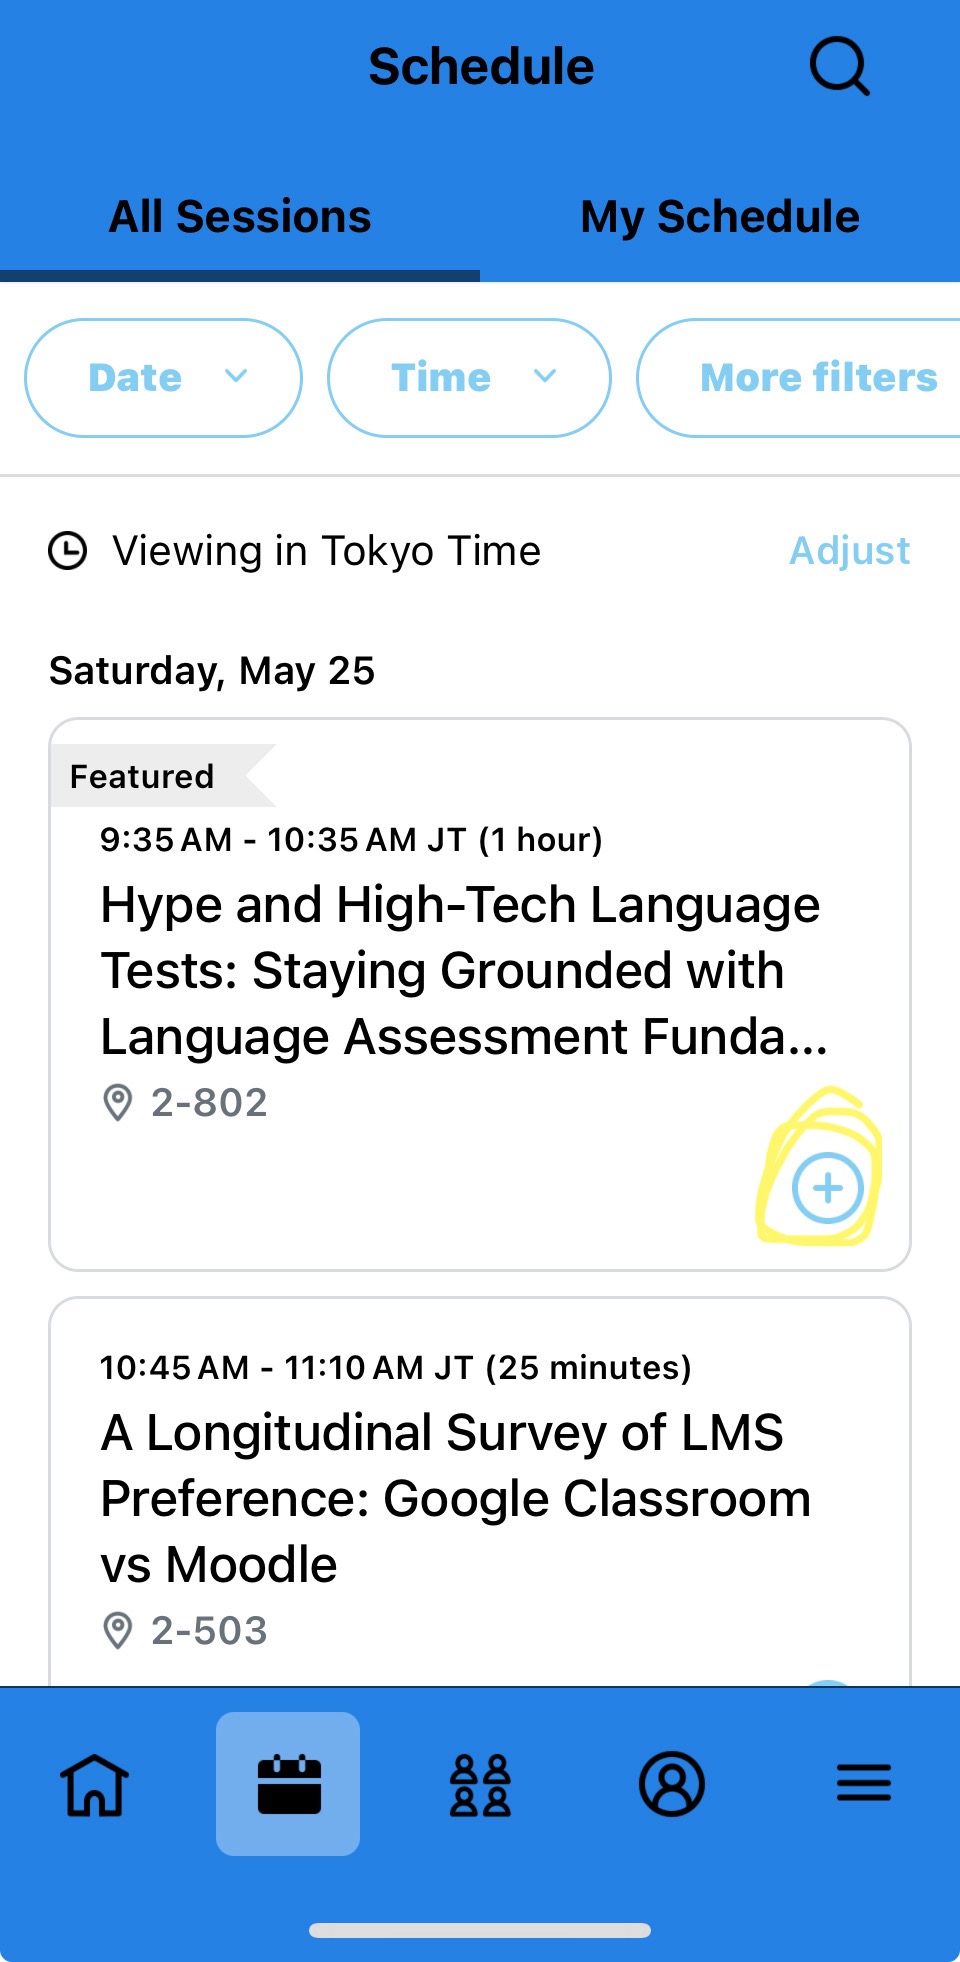 Tap + to add a presentation to your personal schedule